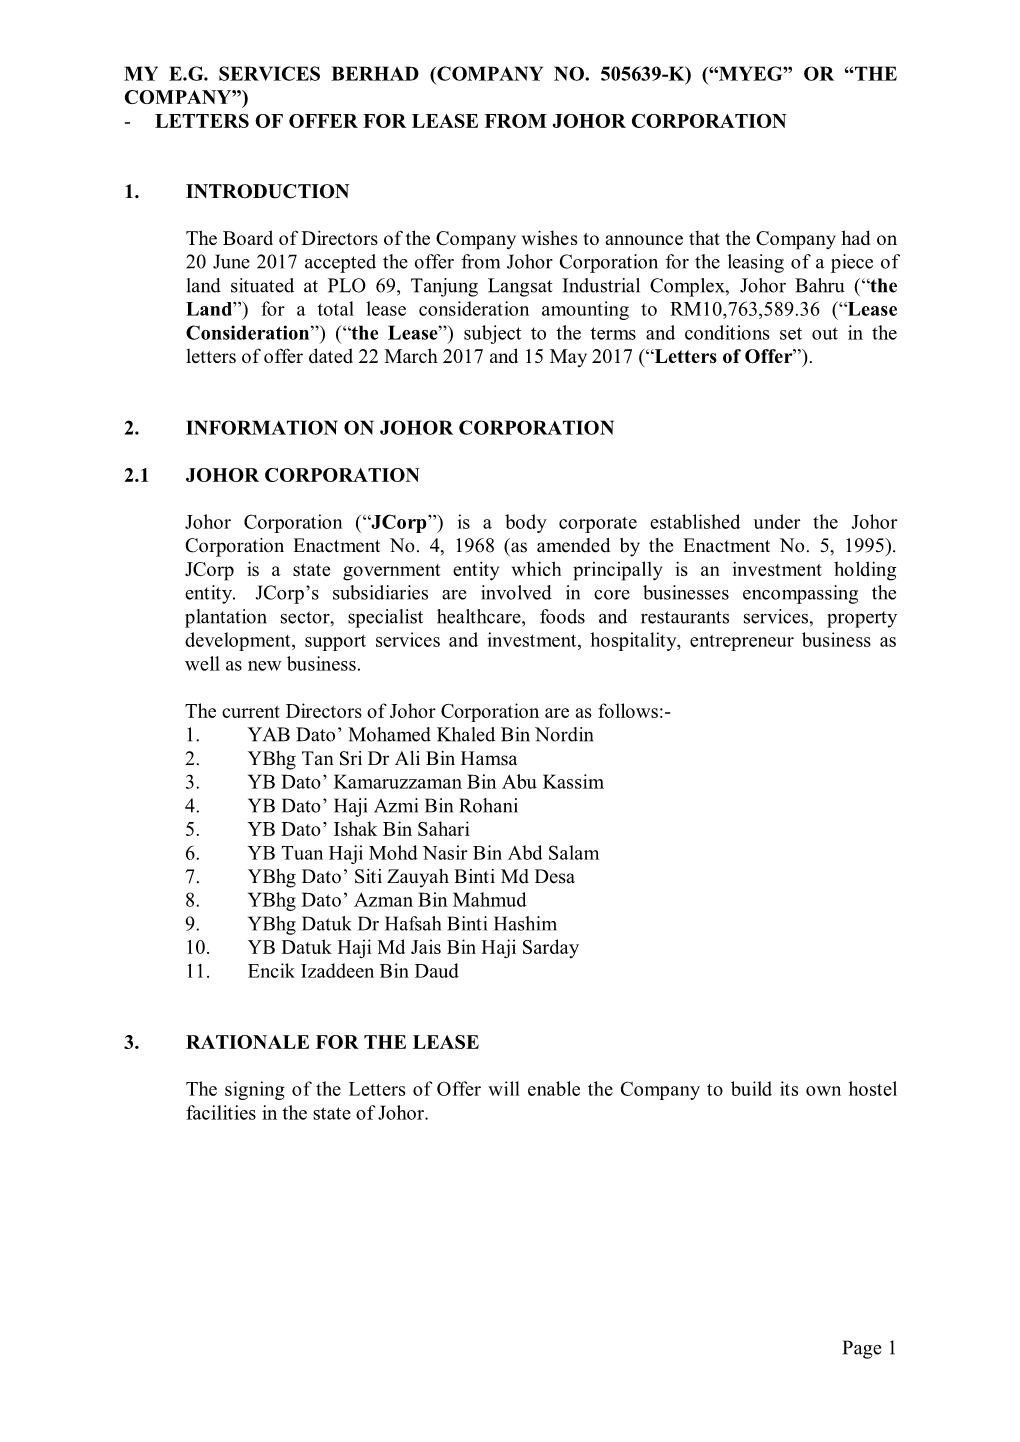 (“Myeg” Or “The Company”) - Letters of Offer for Lease from Johor Corporation